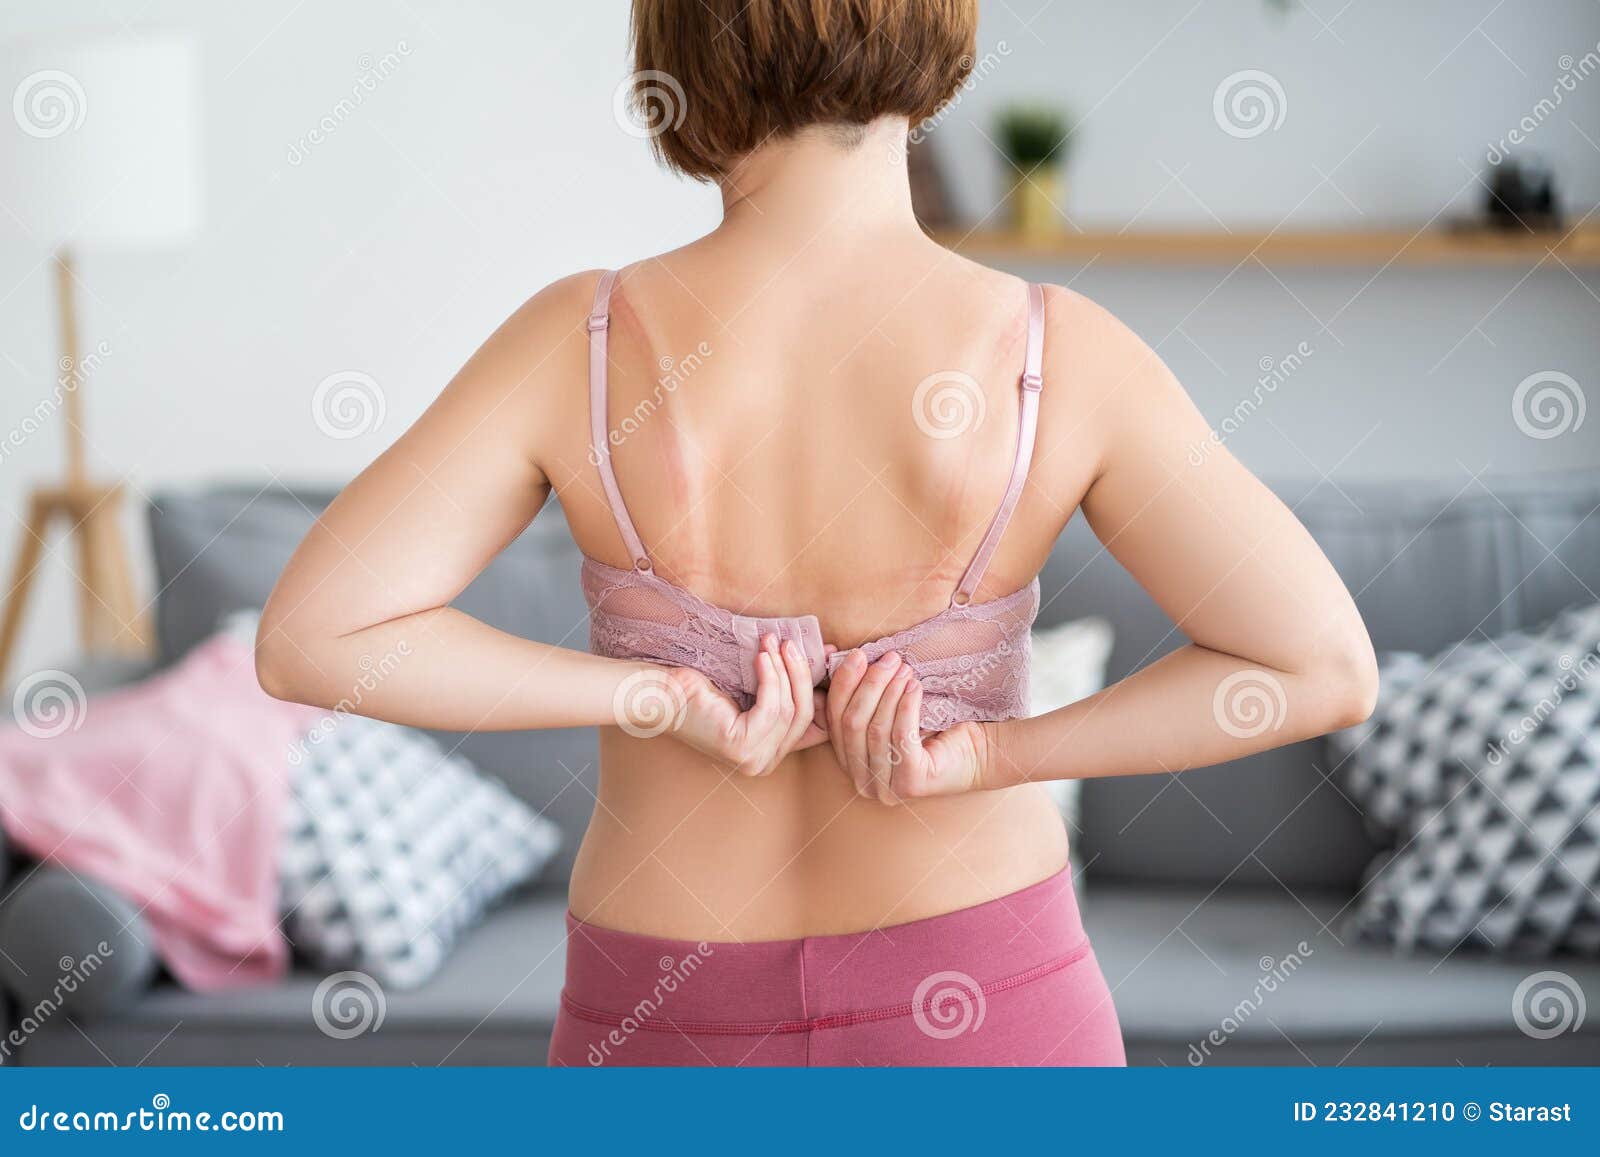 Woman Undressing and Unhooking Her Bra Stock Photo - Image of back